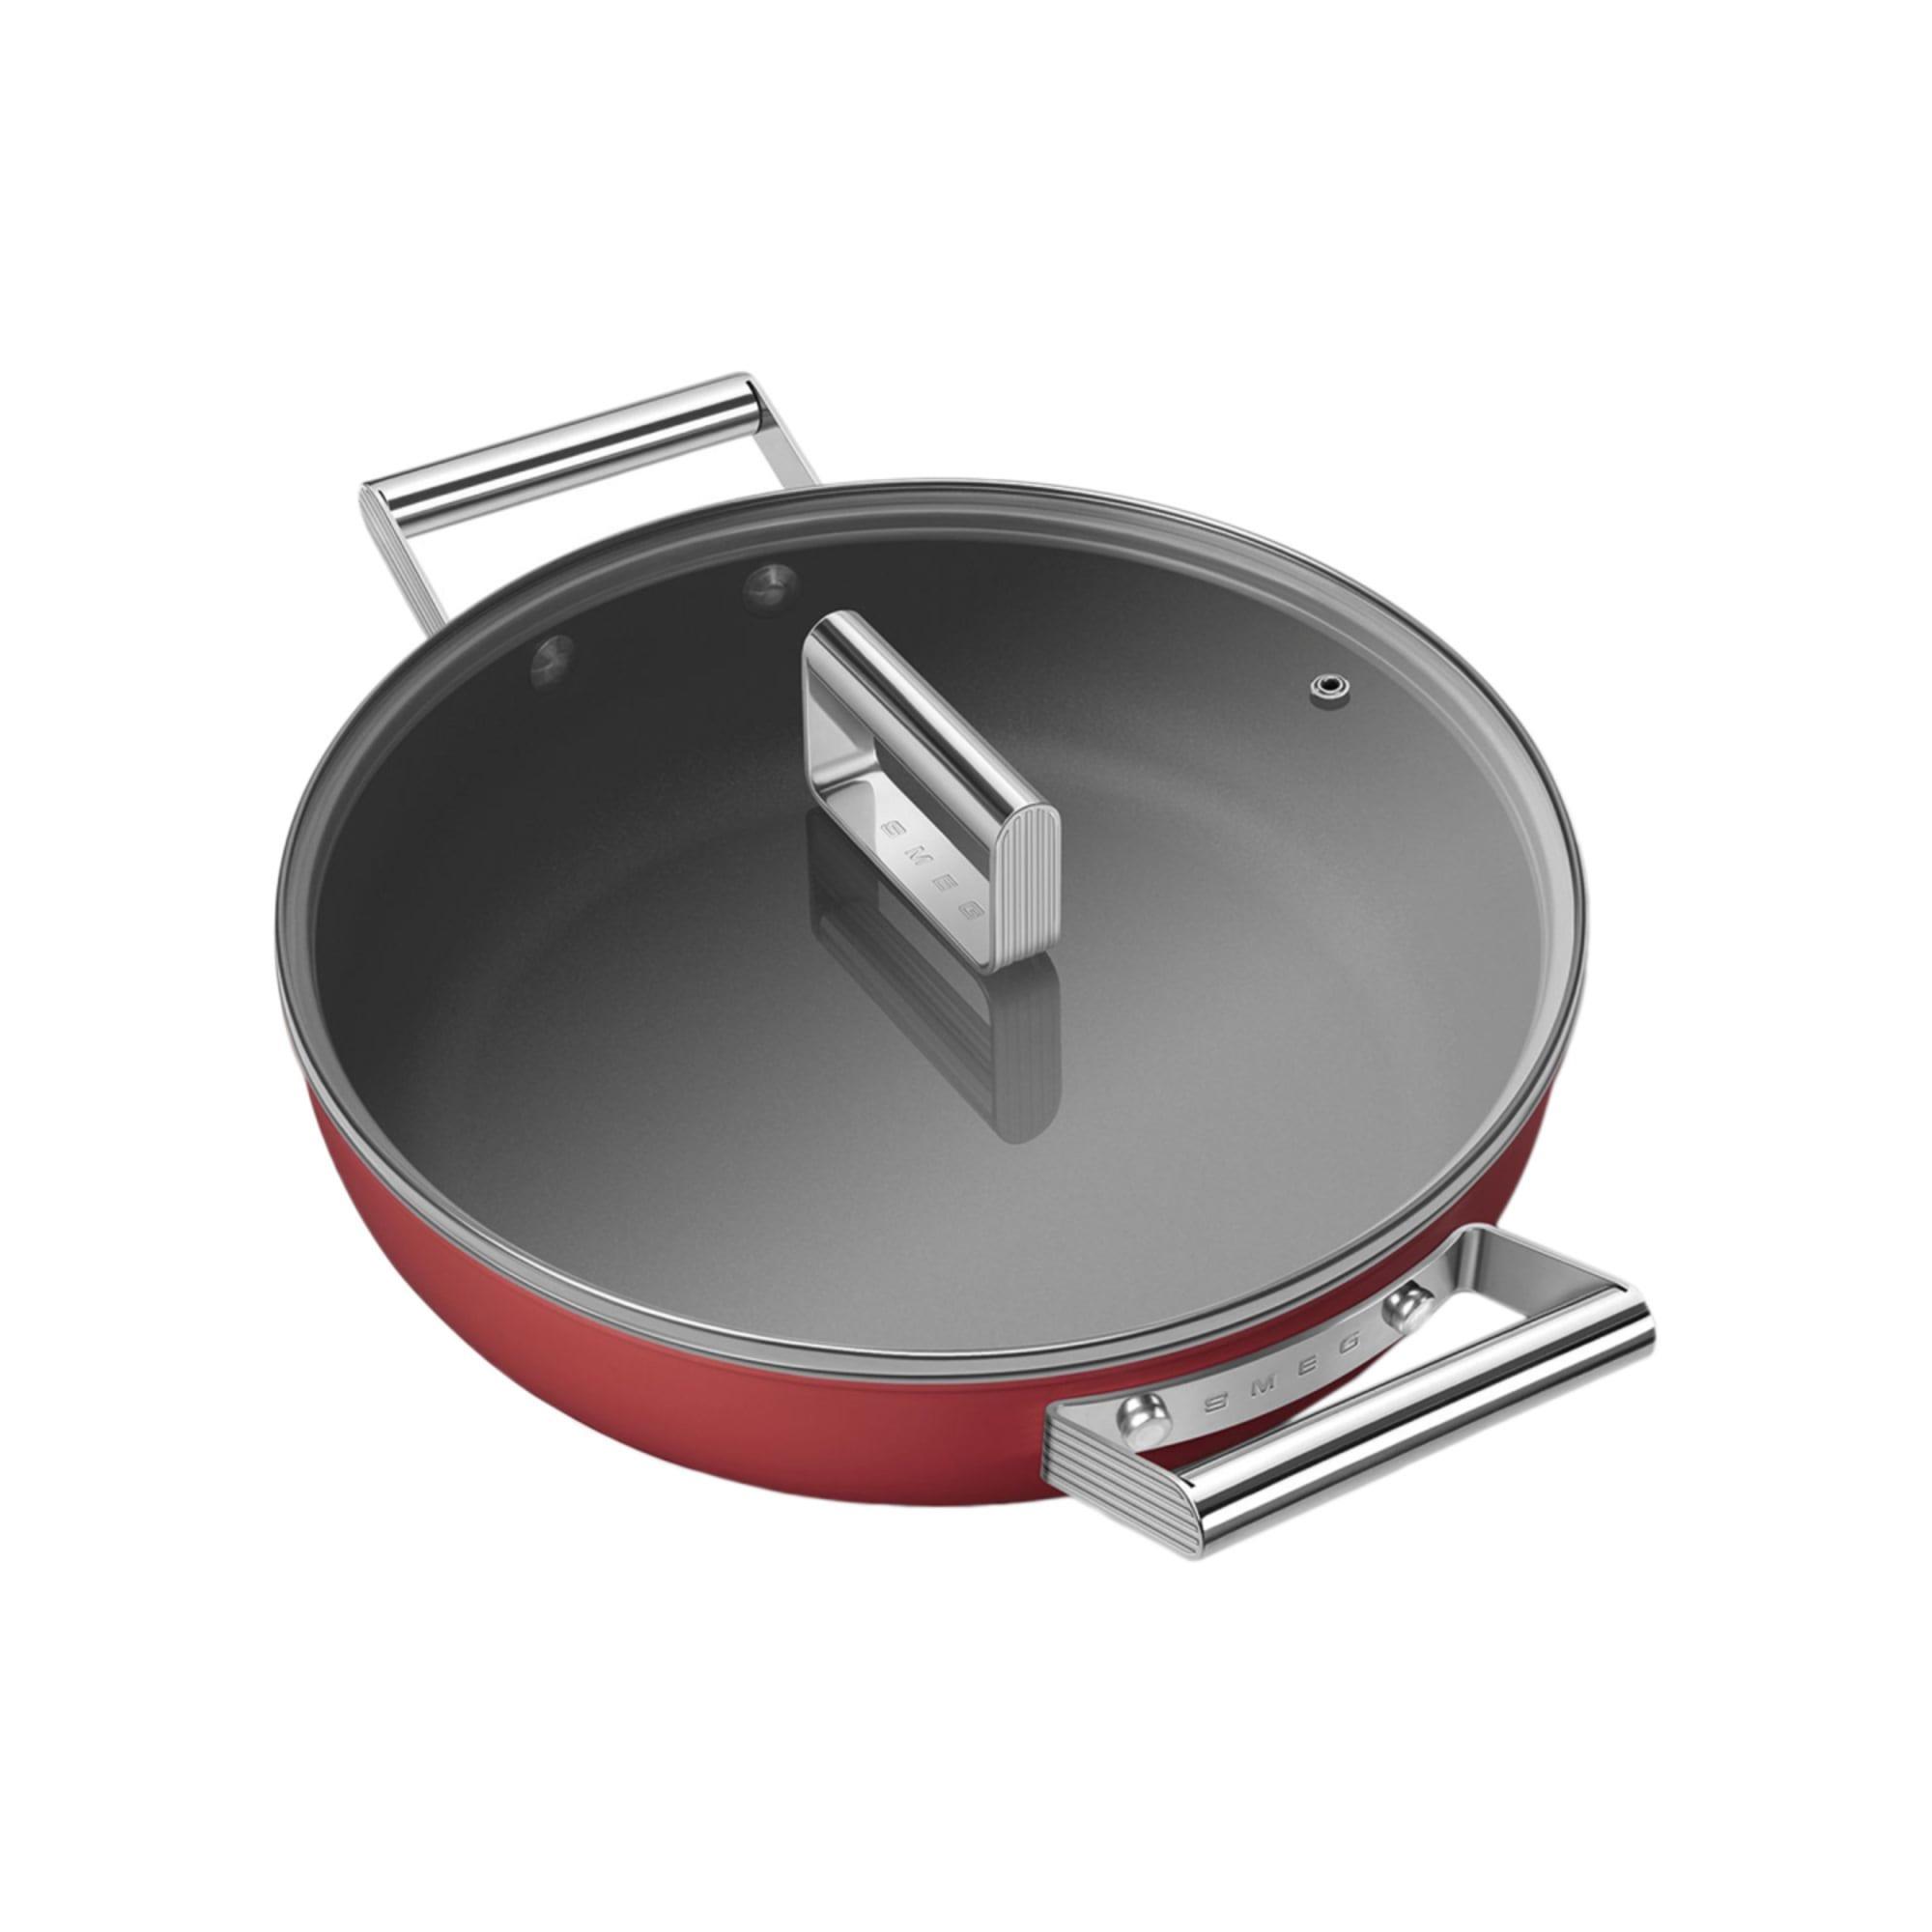 Smeg Non Stick Chef's Pan with Lid 28cm - 3.7L Red Image 5